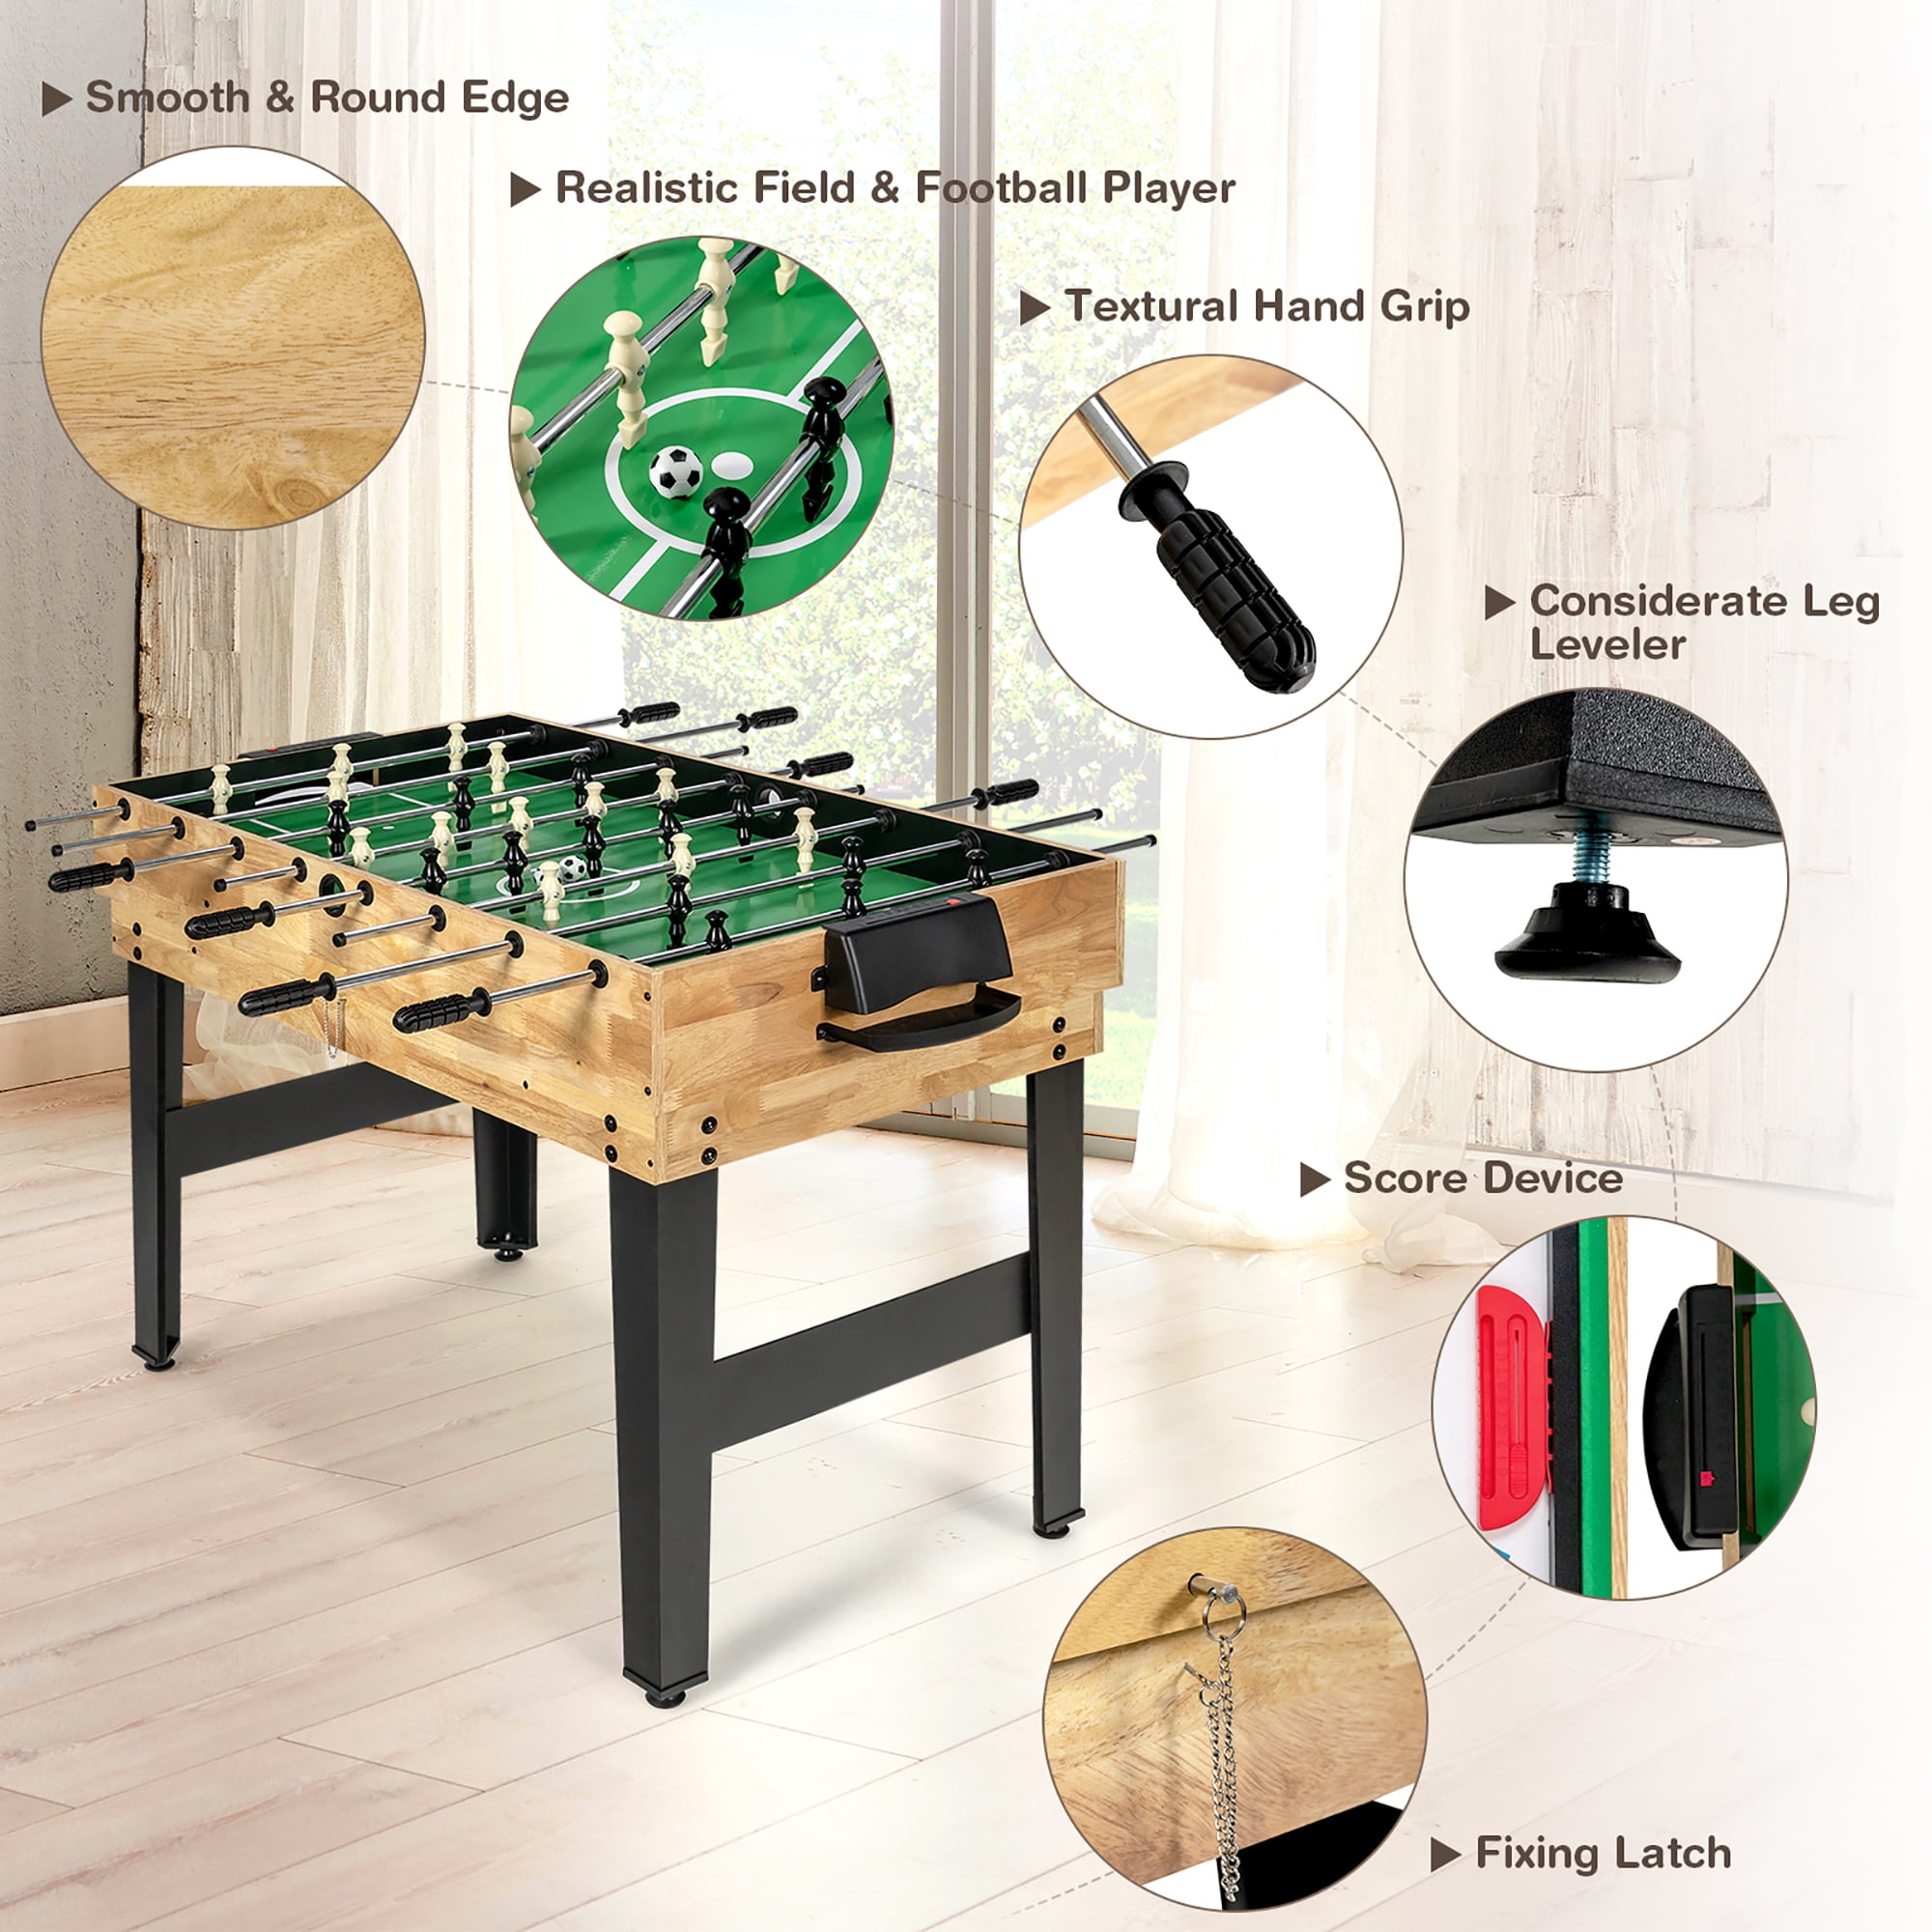 4-in-1 Multi Game Table with Pool Billiards - Costway